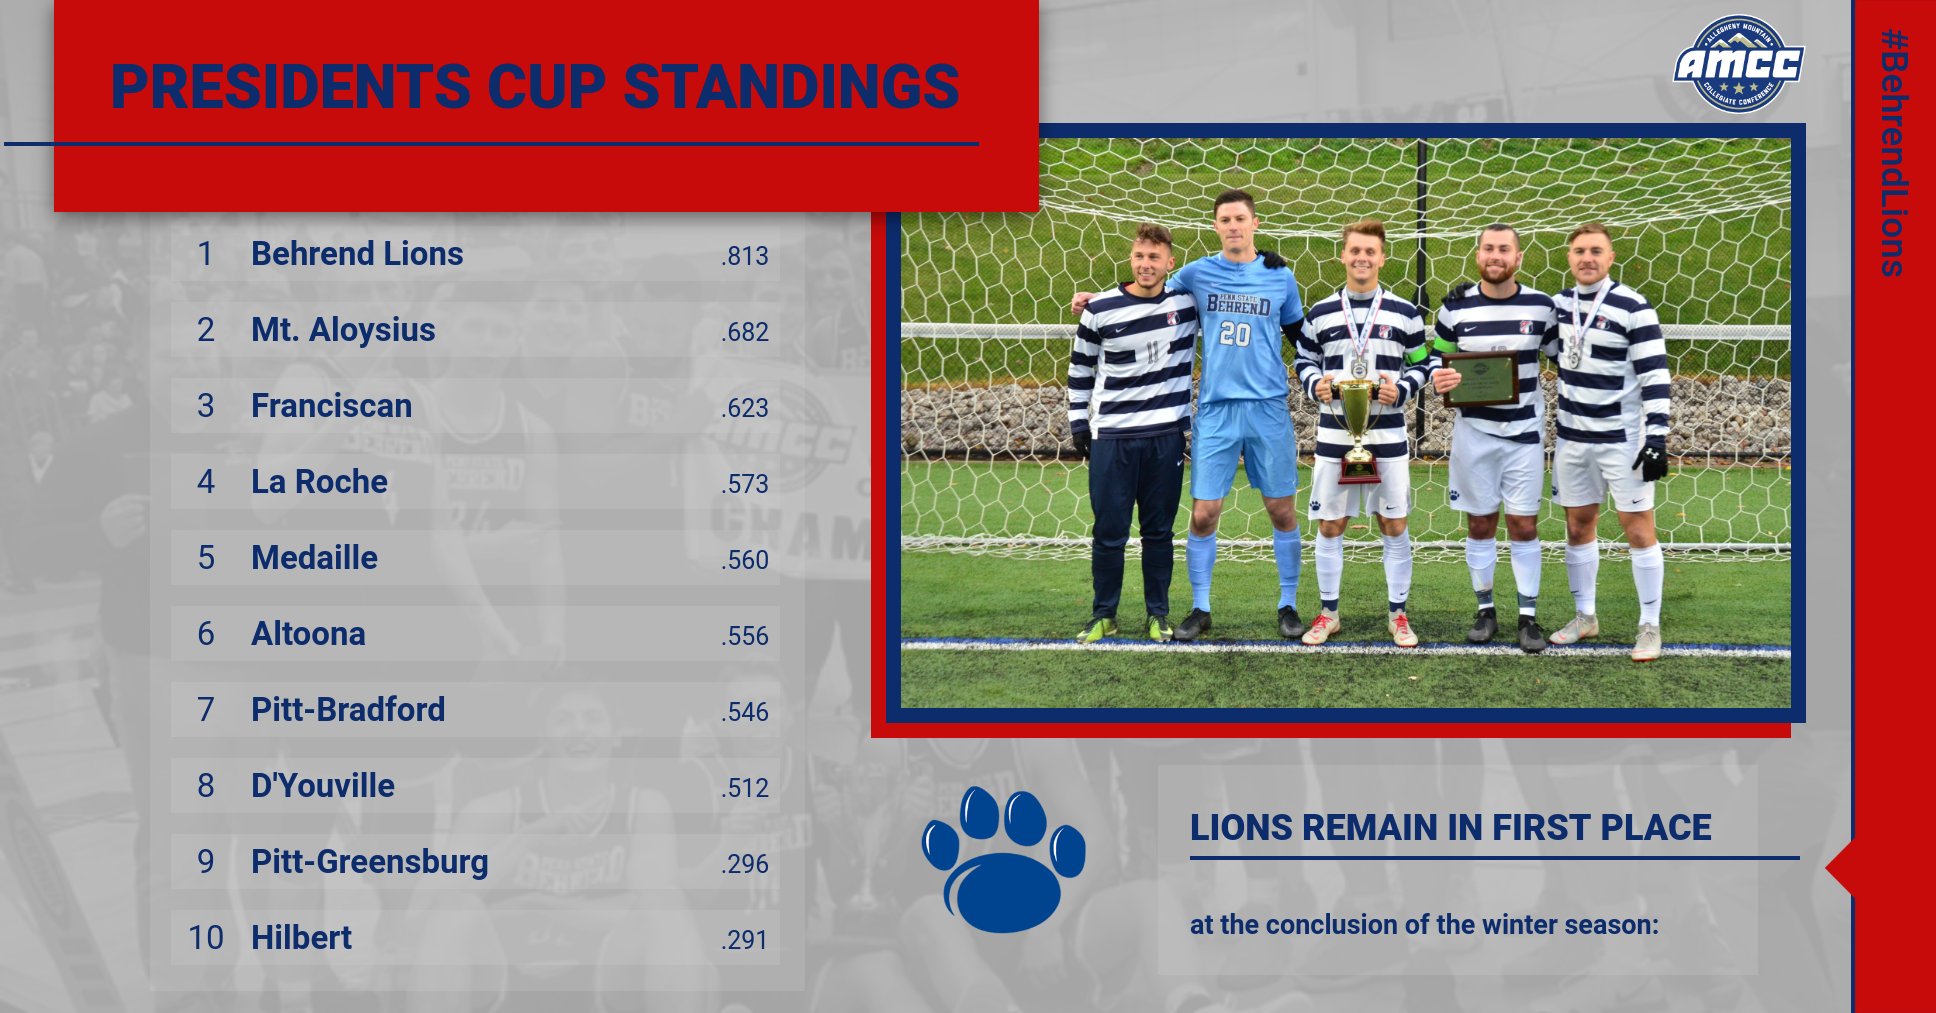 Behrend Lions Continue to Lead Presidents Cup Standings